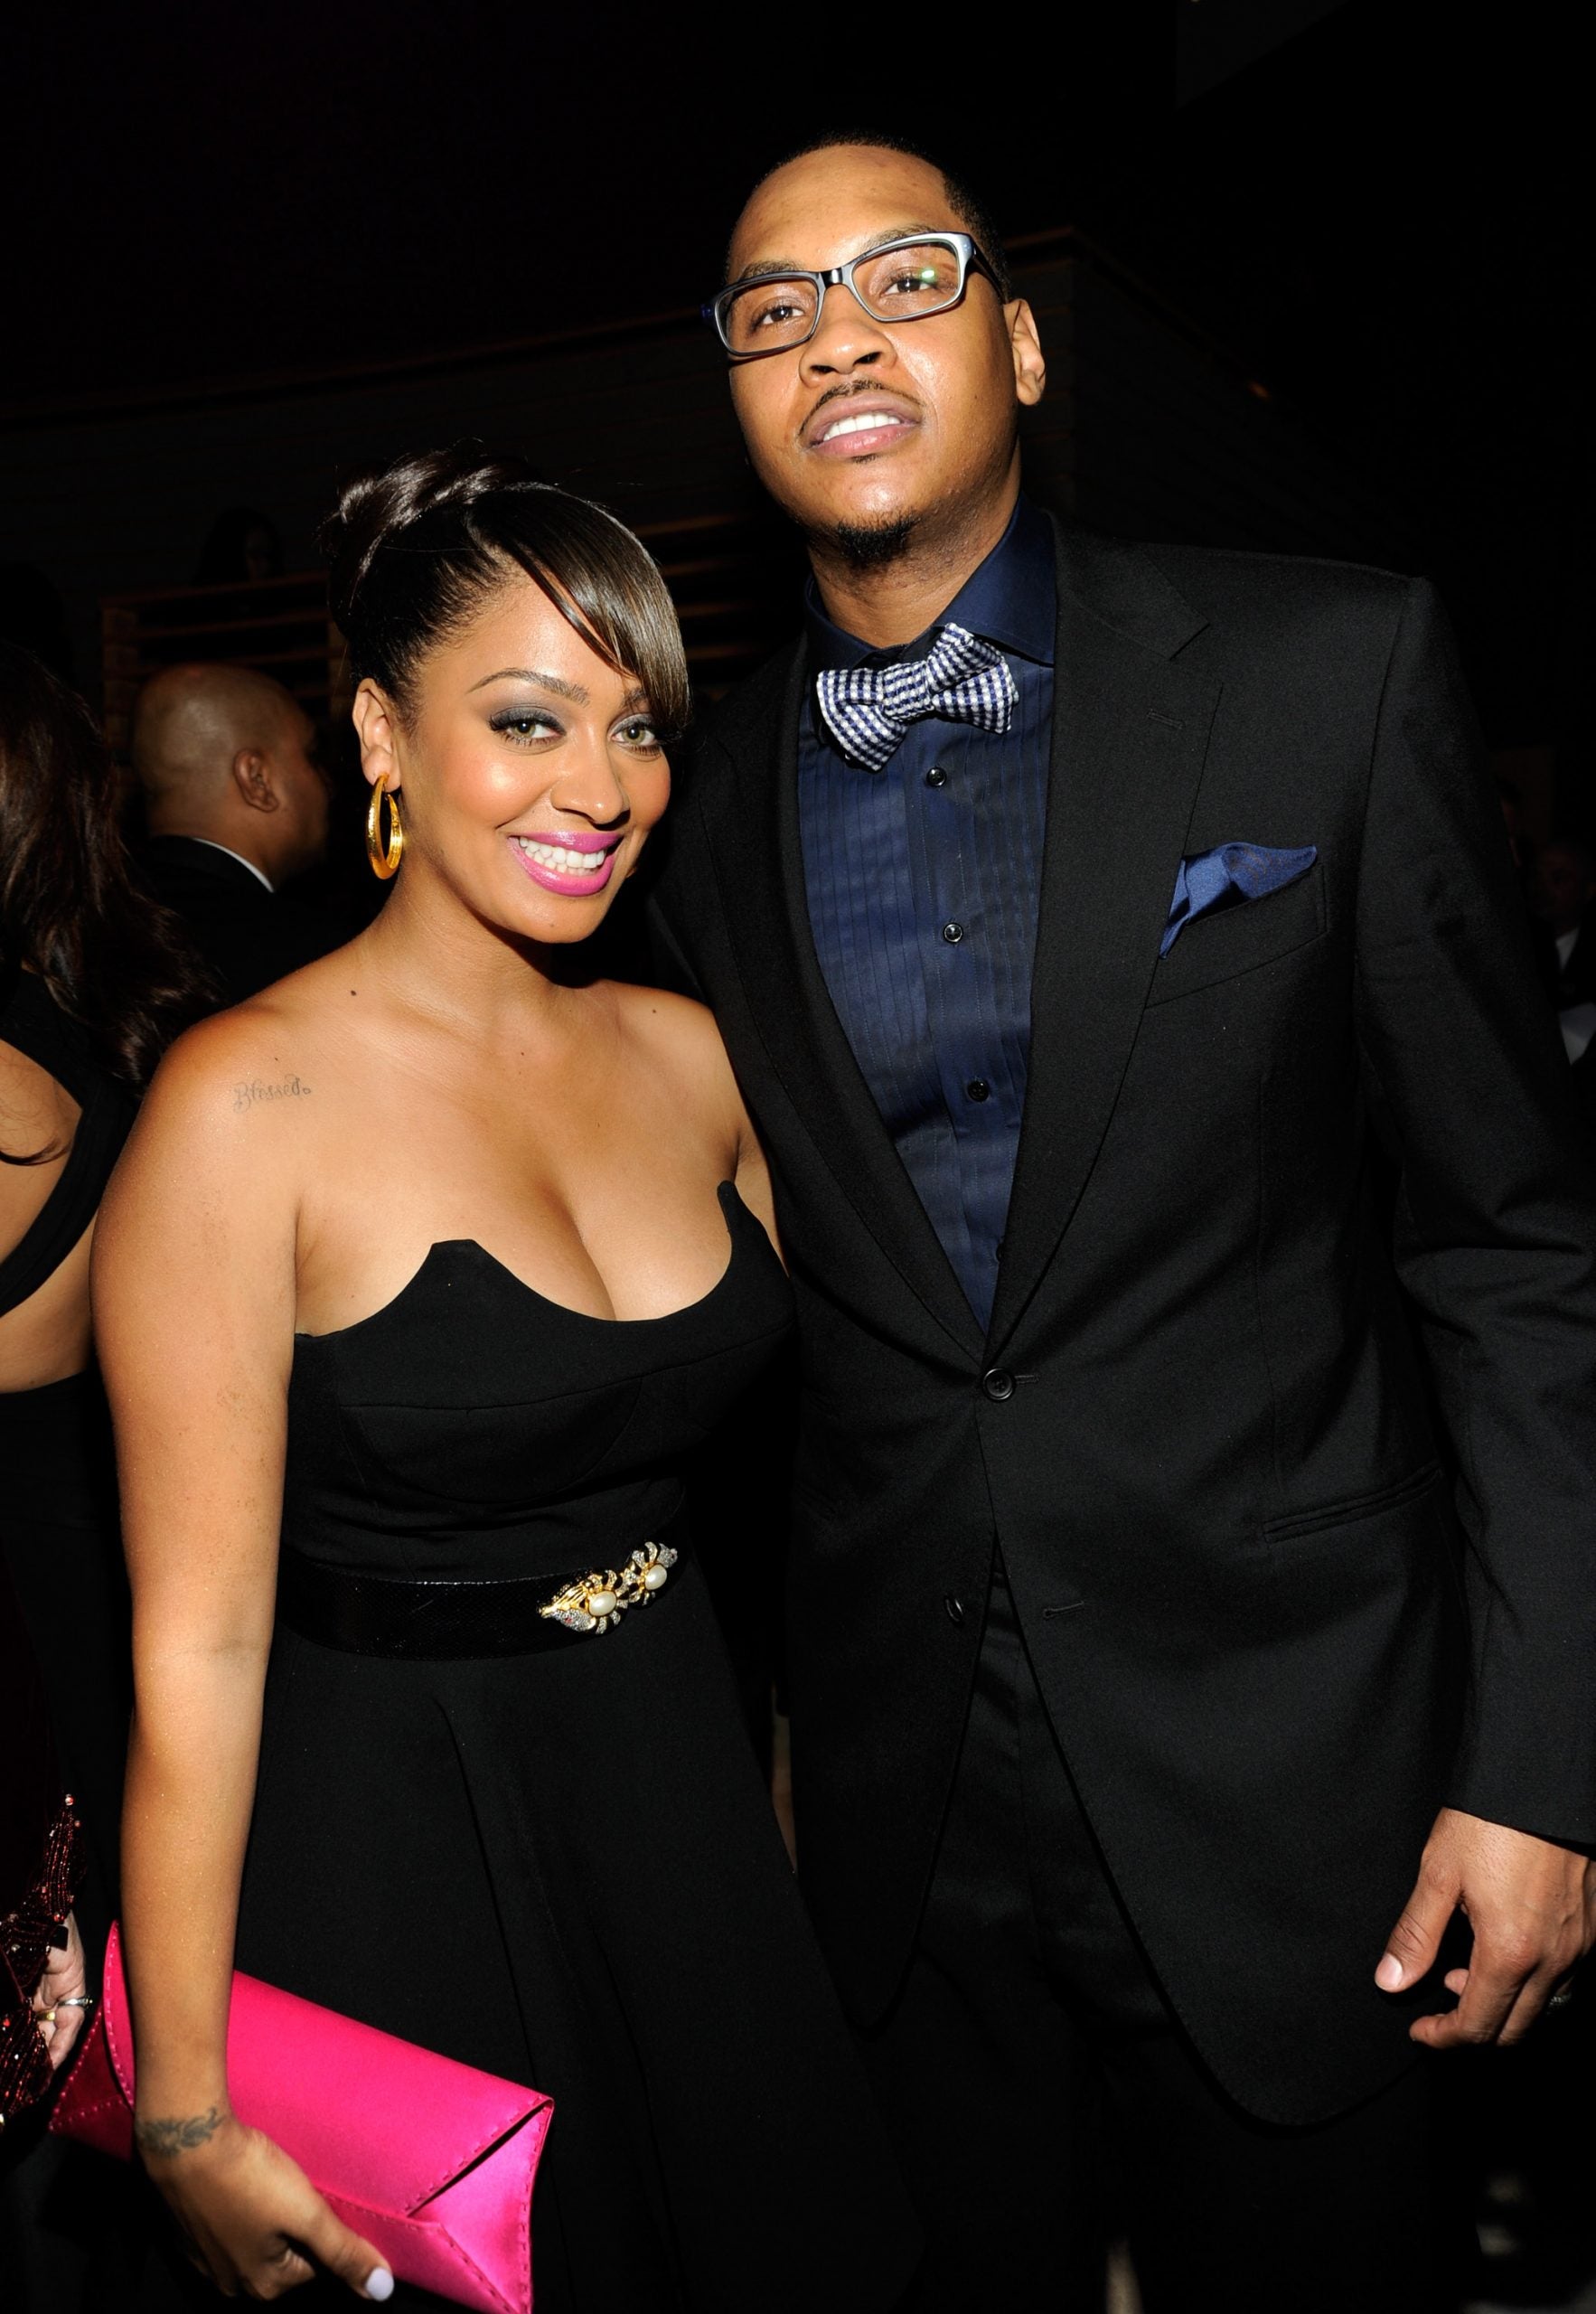 It's Really Over: La La Anthony Reportedly Files For Divorce From Carmelo Anthony After 11 Years Of Marriage